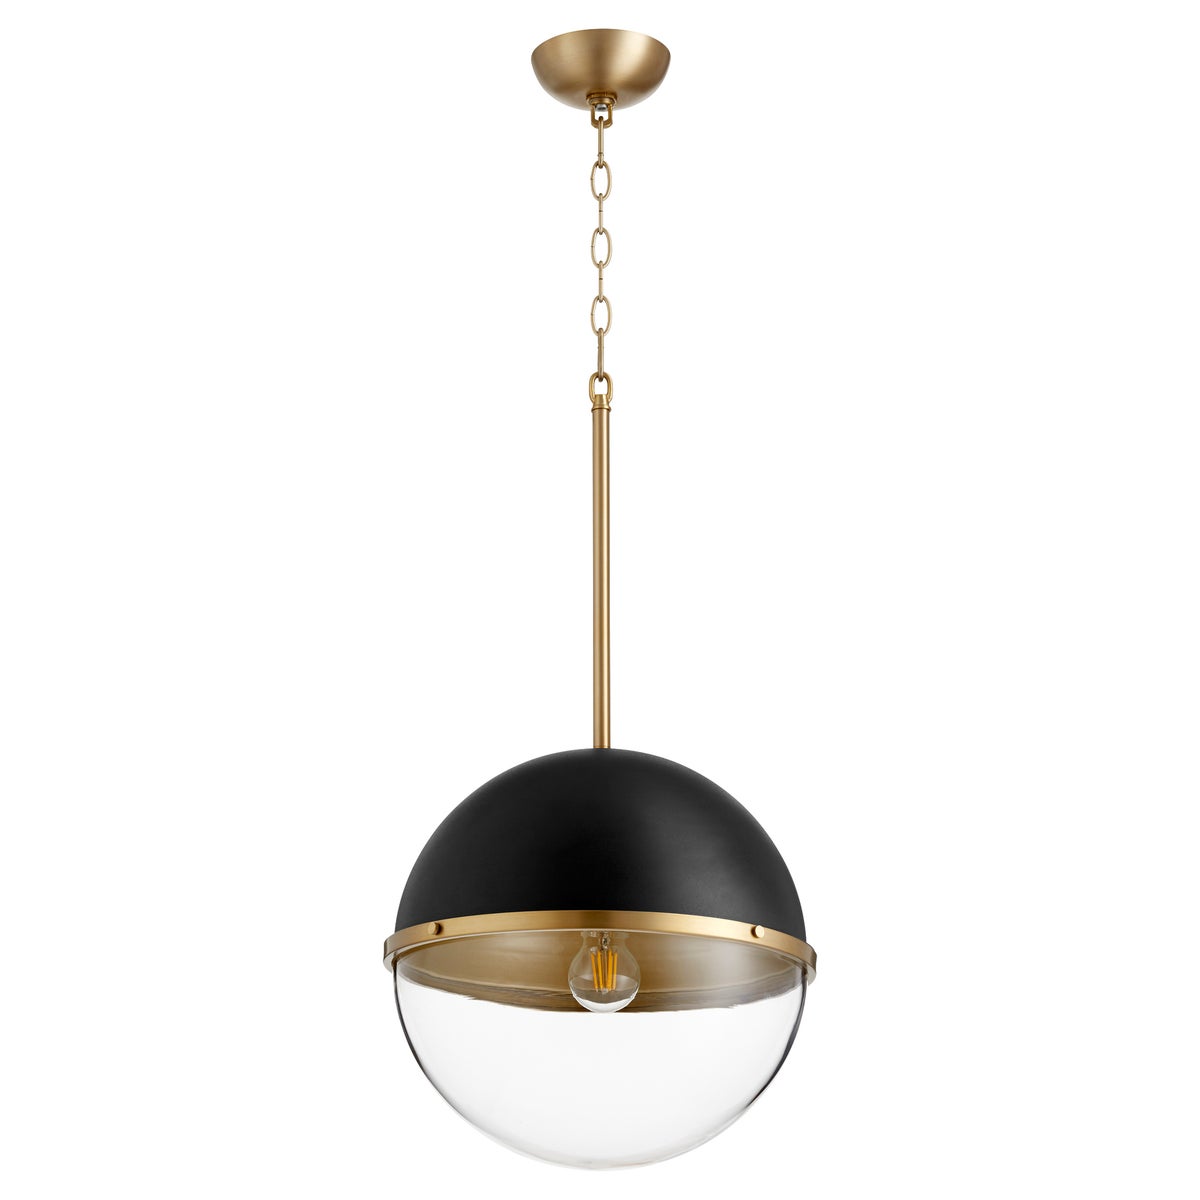 Black and Aged Brass Soft Contemporary Globe Pendant